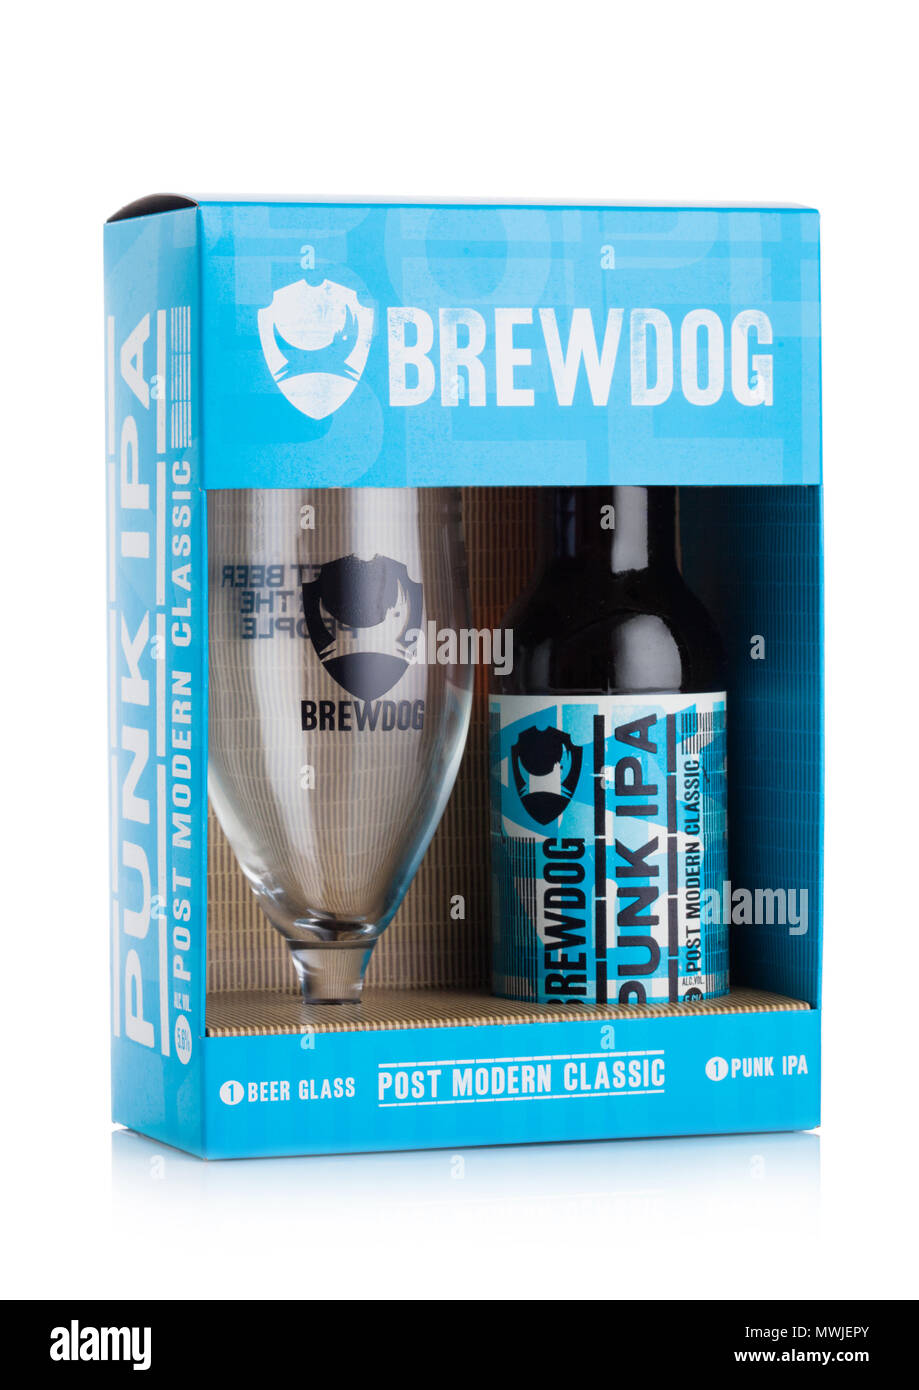 London Uk June 01 2018 Gift Box With Original Glass And Bottle Of Punk Ipa Post Modern Classic From The Brewdog Brewery On White Background